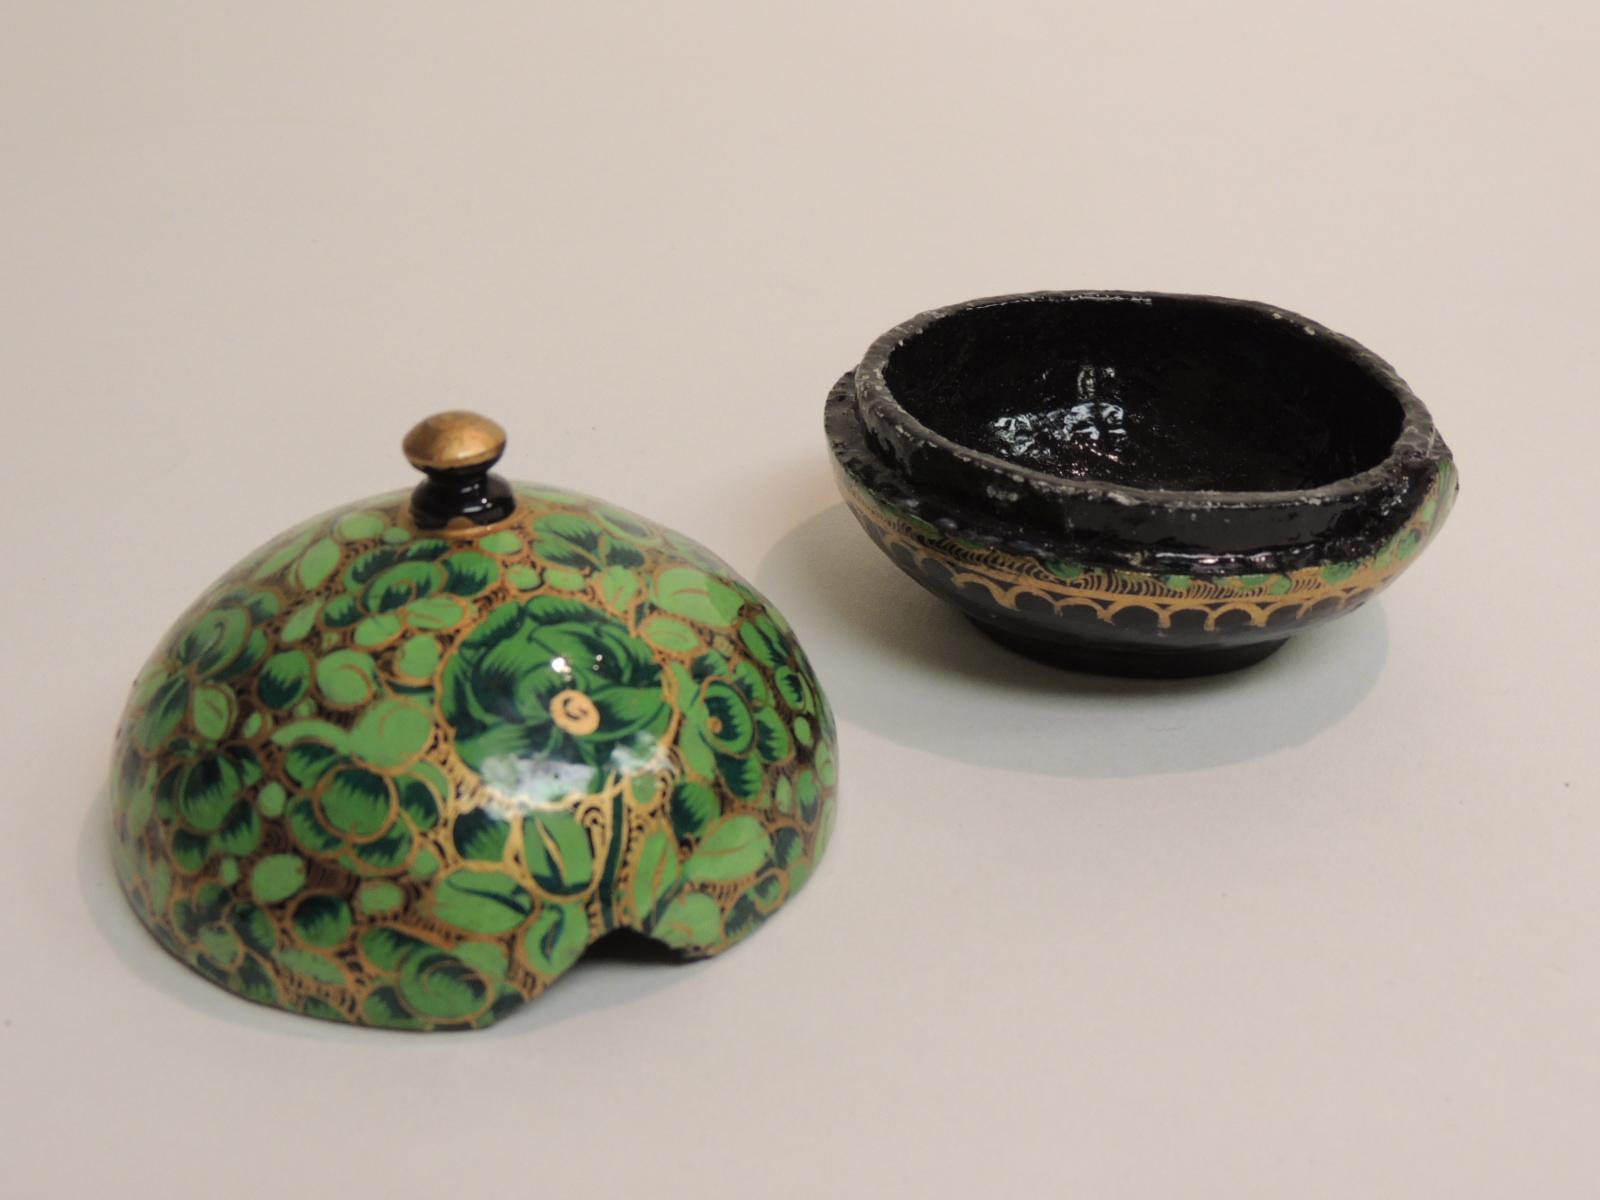 Small vintage hand painted Indian lacquered box. Round small box painted with green flowers and leaves and accent in gold. The top opens. Finished inside too. Papier mâché
India,
1980s.